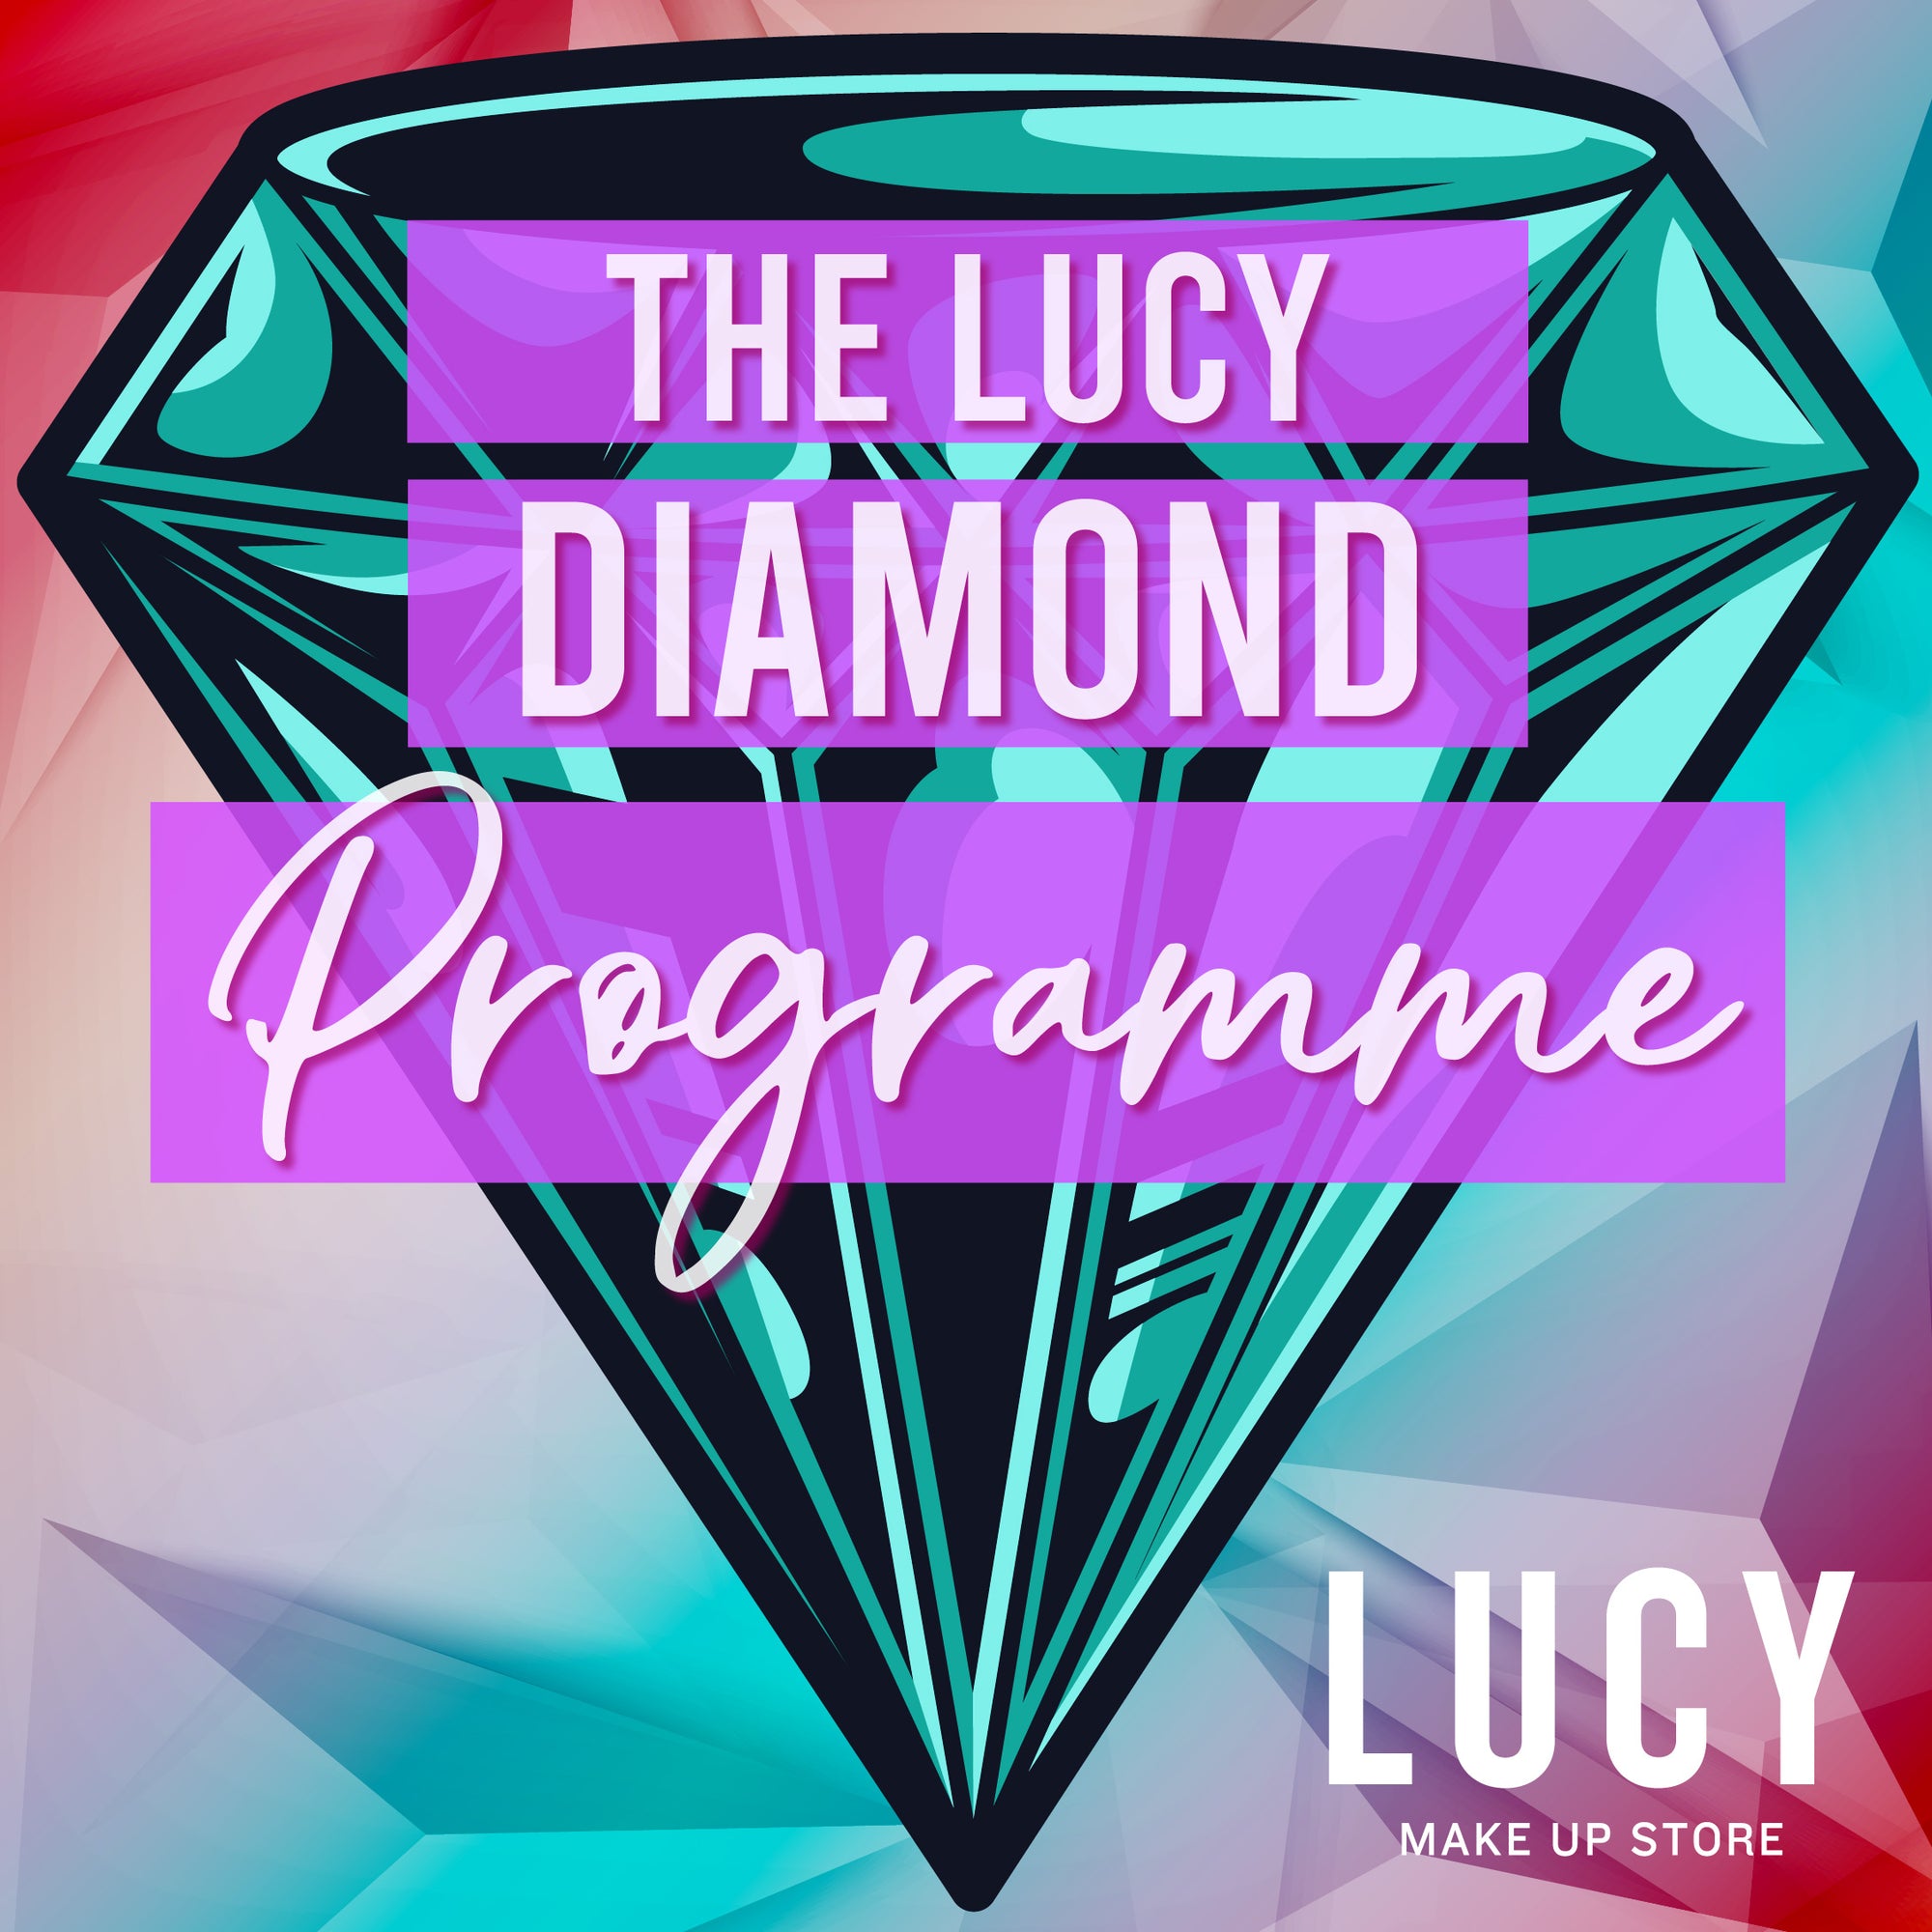 The LUCY Diamond Programme - LUCY Makeup Store Promotion